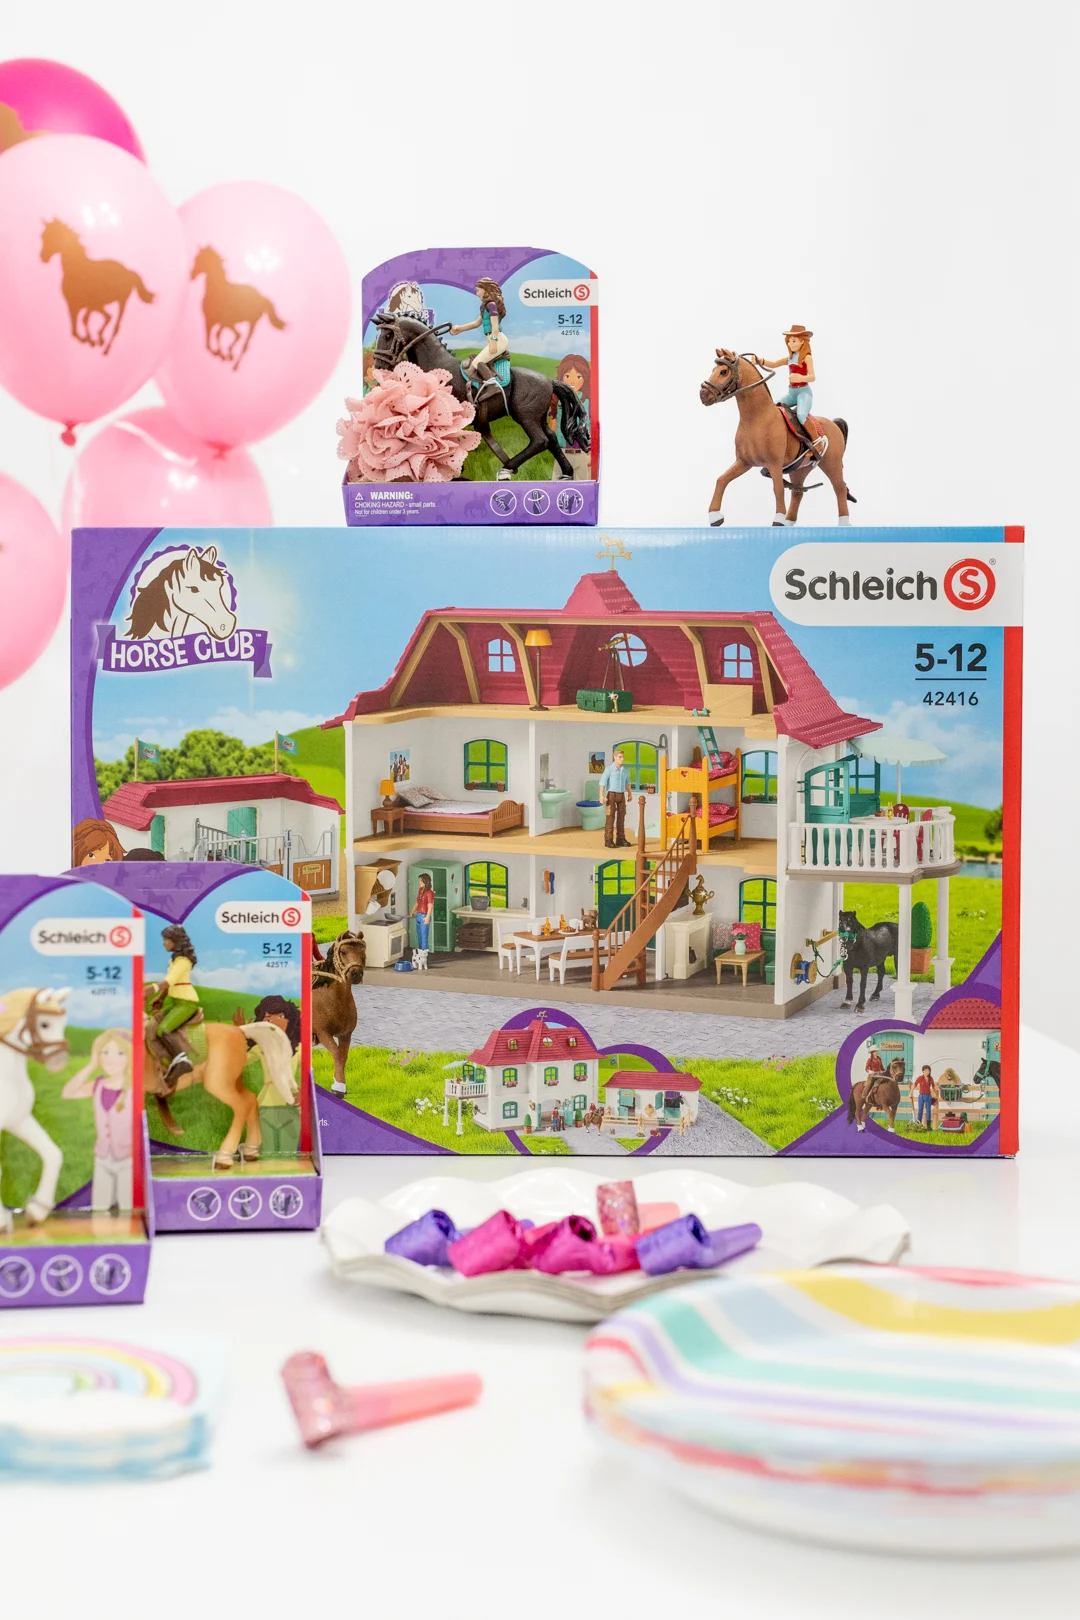  Large horse stable with house and stable, Schleich’s largest playset to date